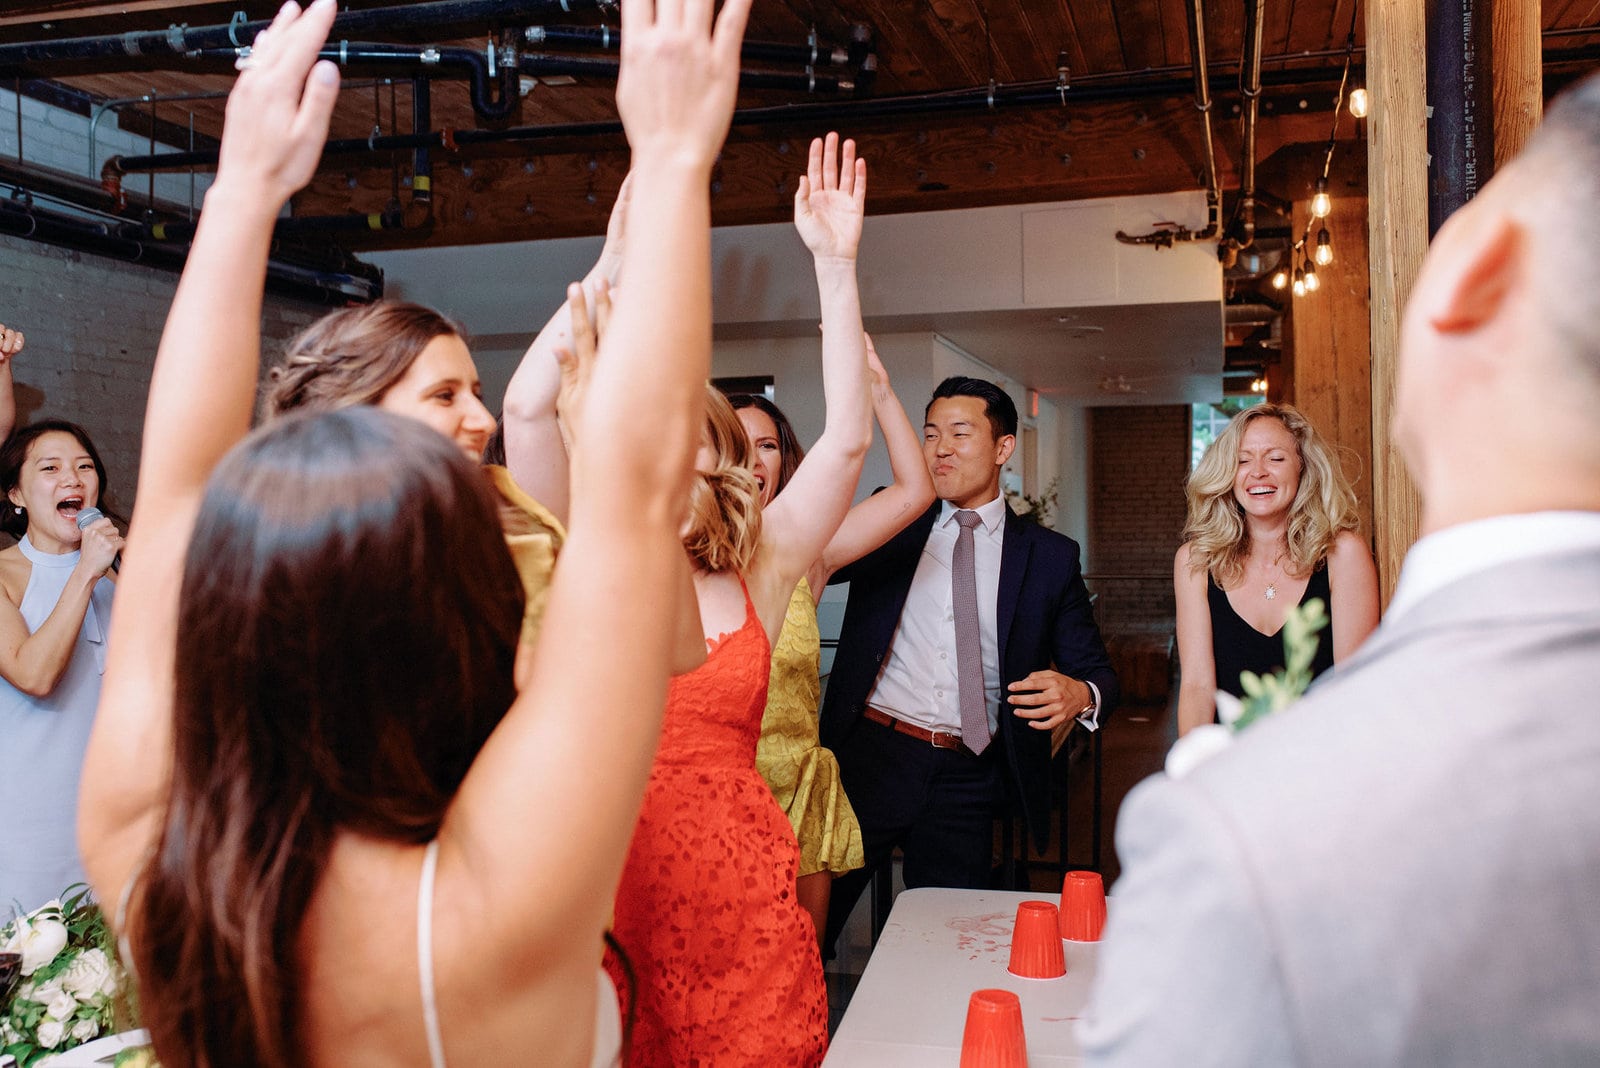 Bride and Groom Flip Cup Spontaneous Fun Game During Reception at Hotel Ocho Downtown Toronto Wedding Photographer Jacqueline James Photography